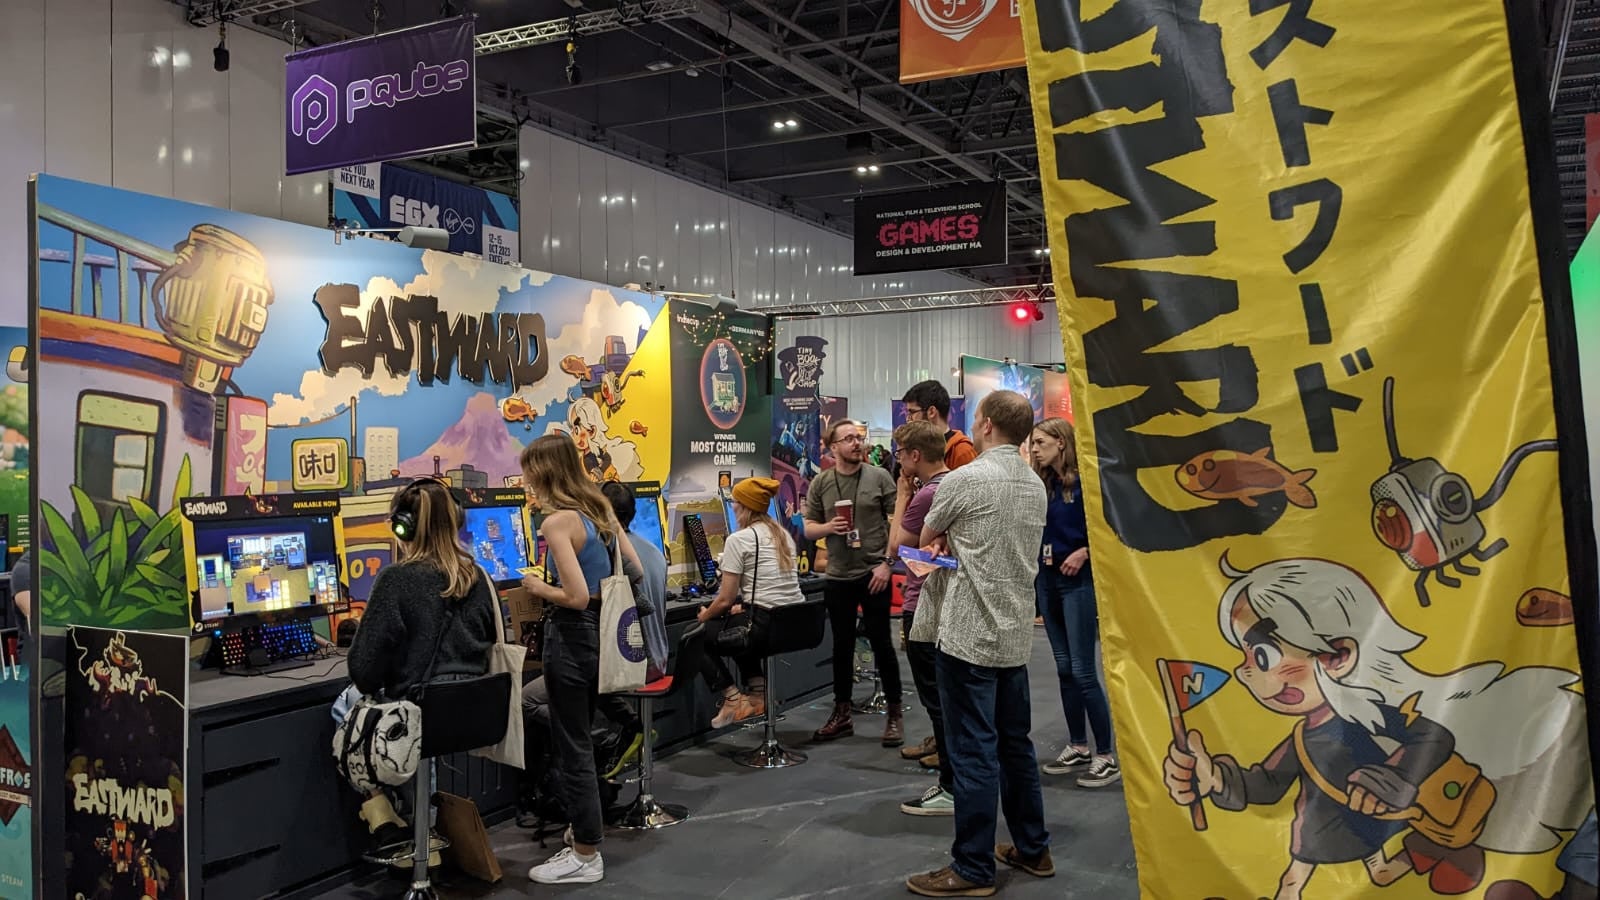 A photo of the Eastward stand at EGX 2022.